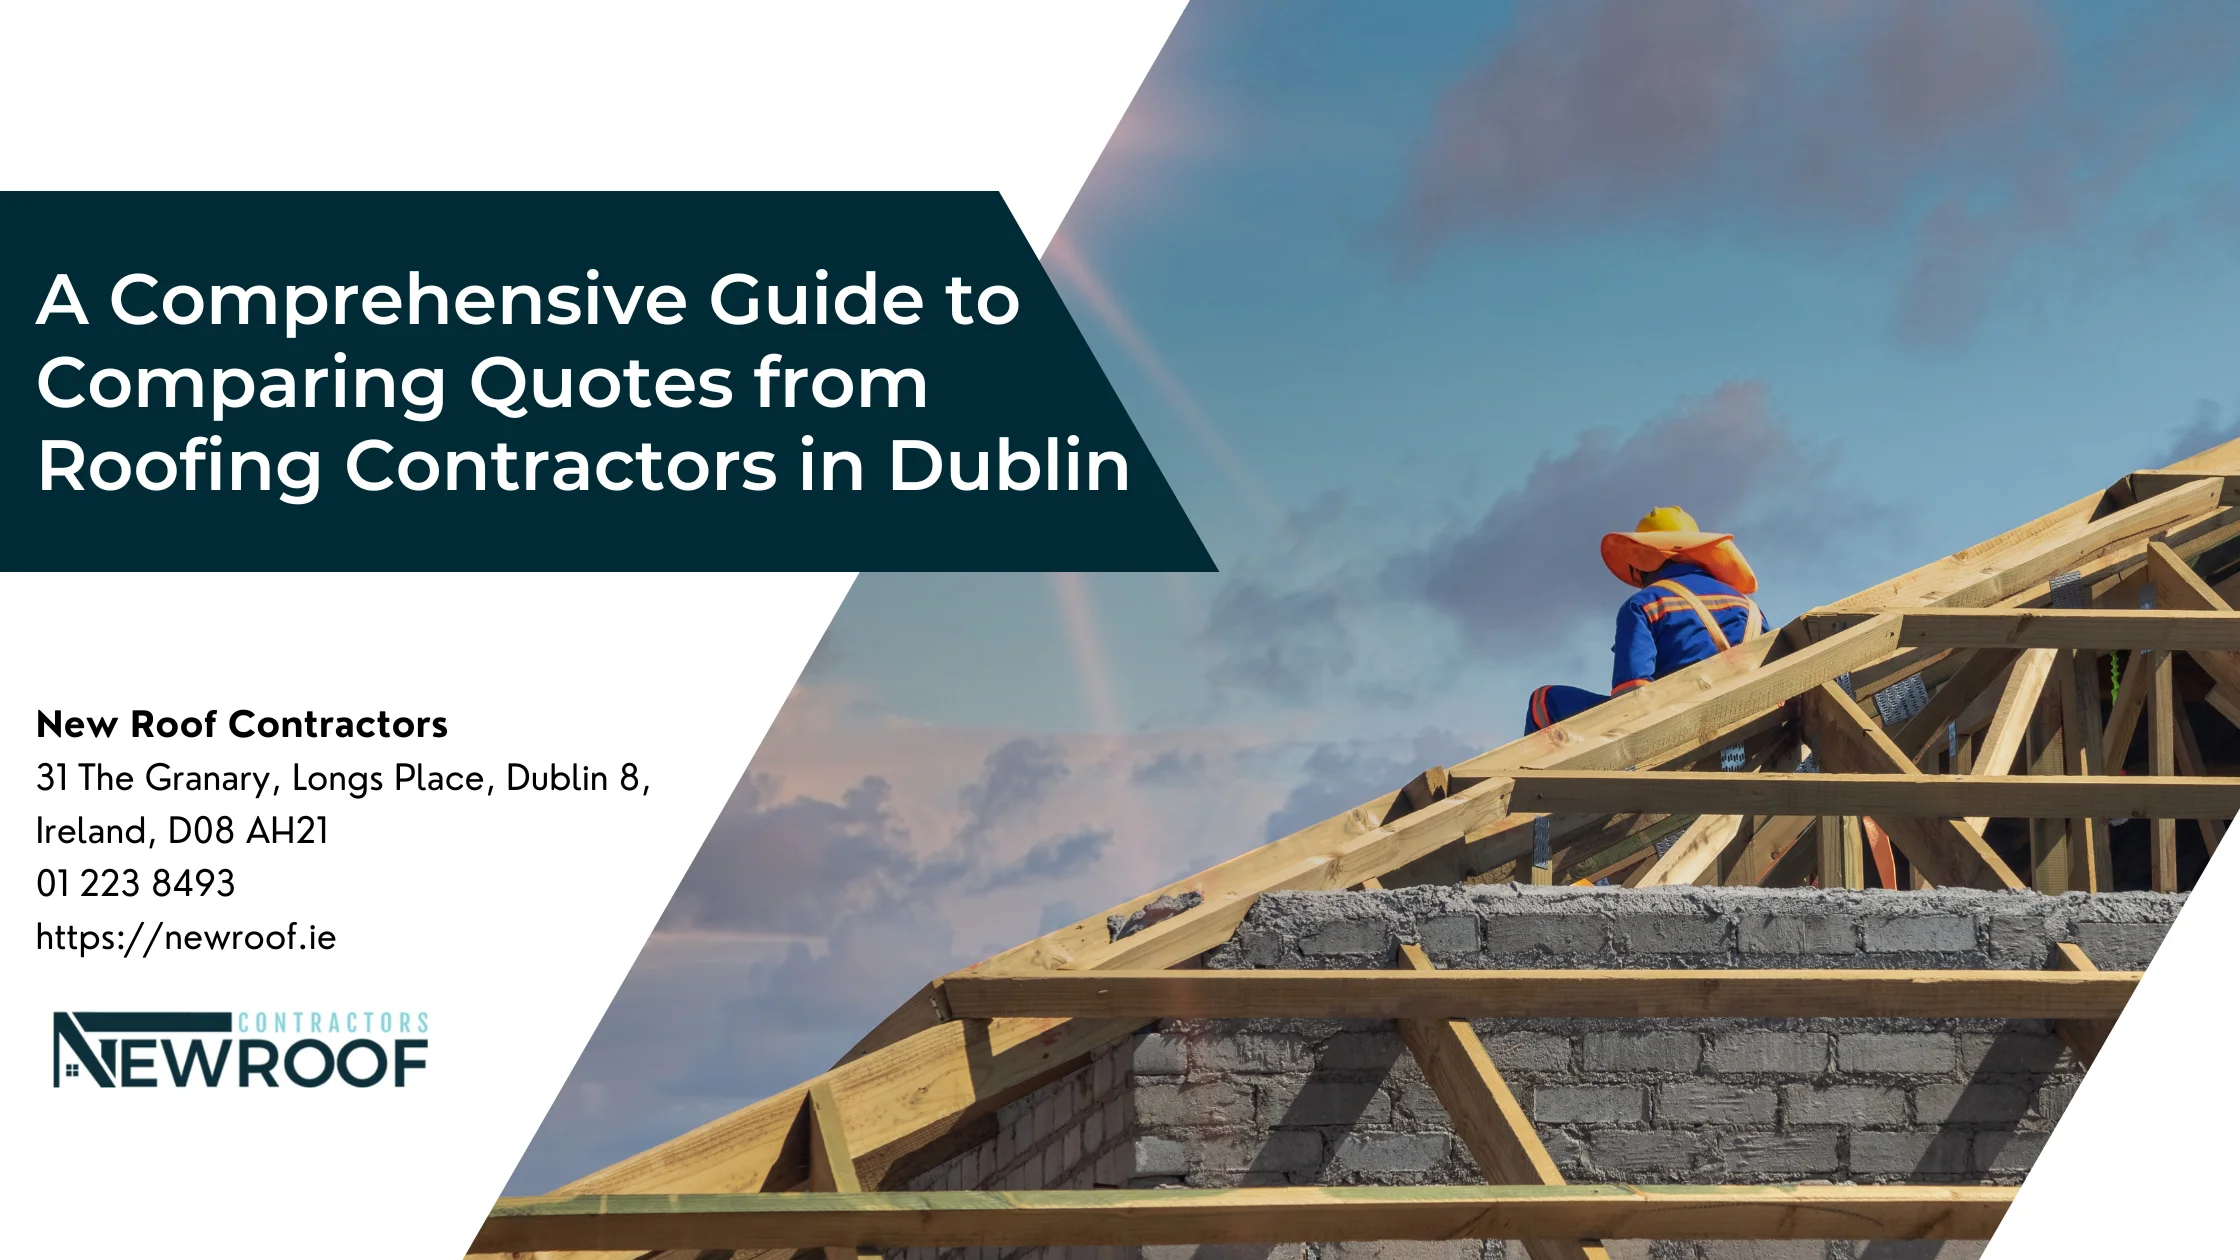 A Comprehensive Guide to Comparing Quotes from Roofing Contractors in Dublin